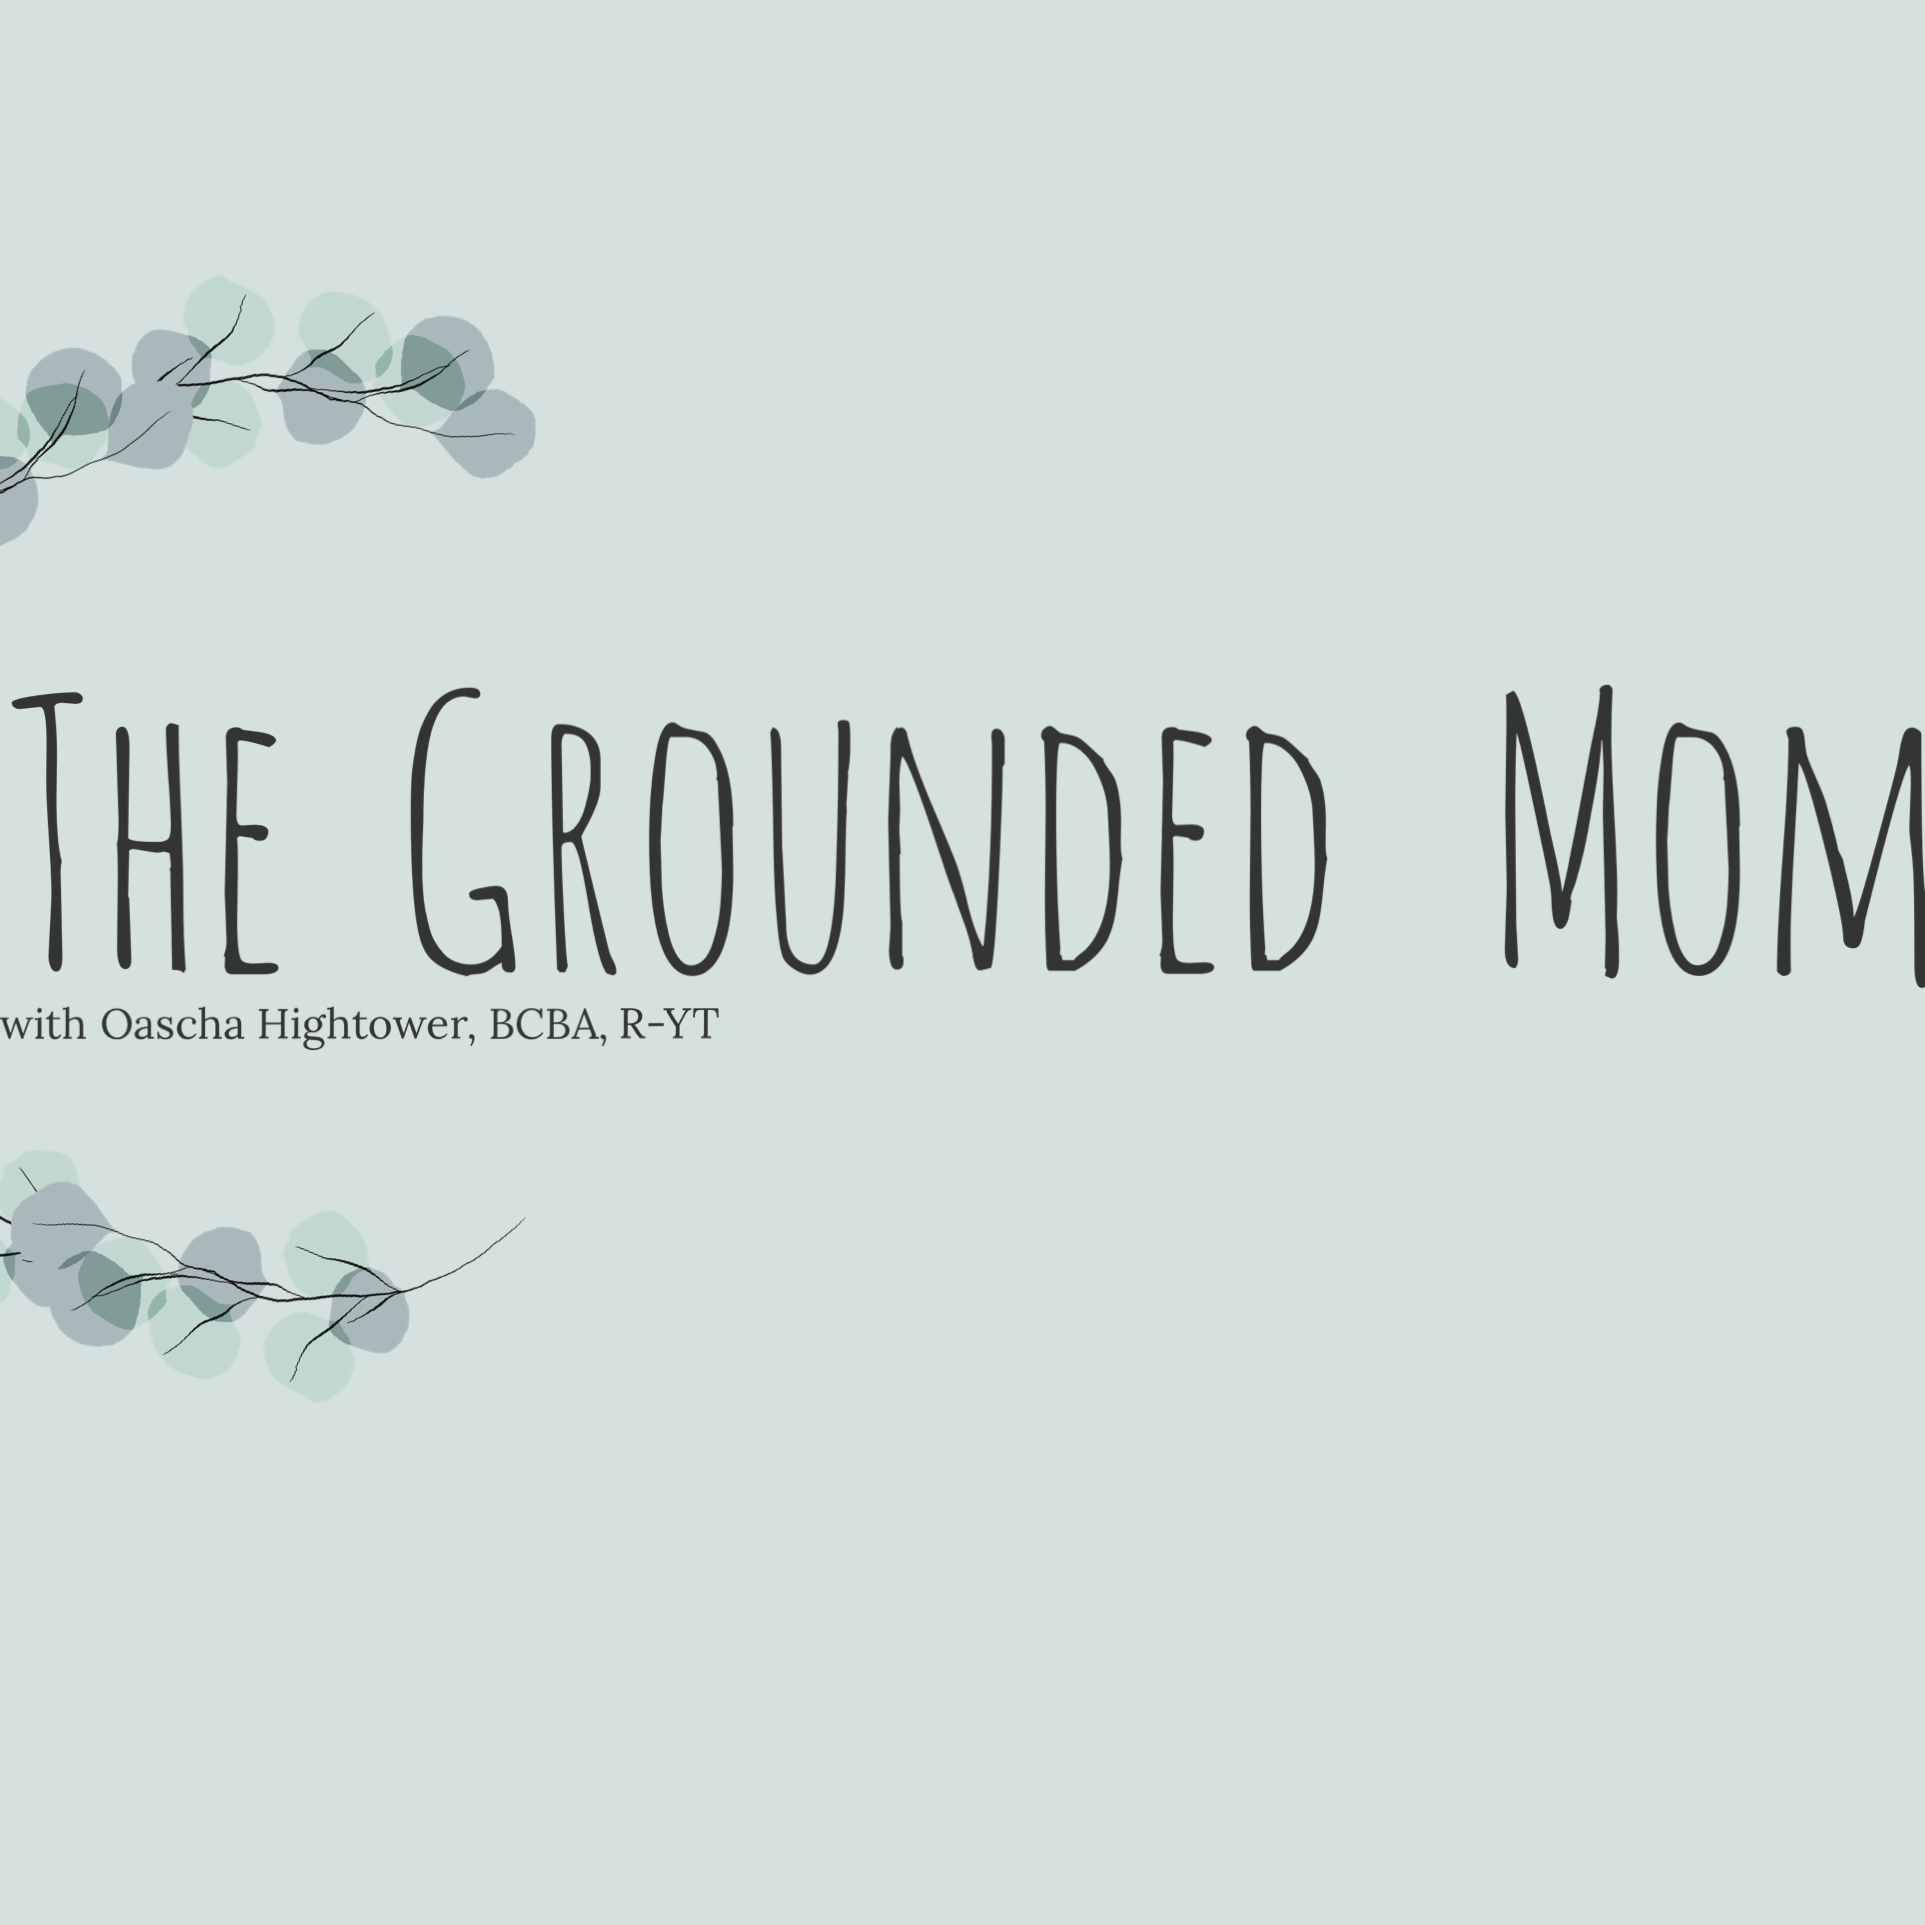 The Grounded Mom with Oascha Hightower